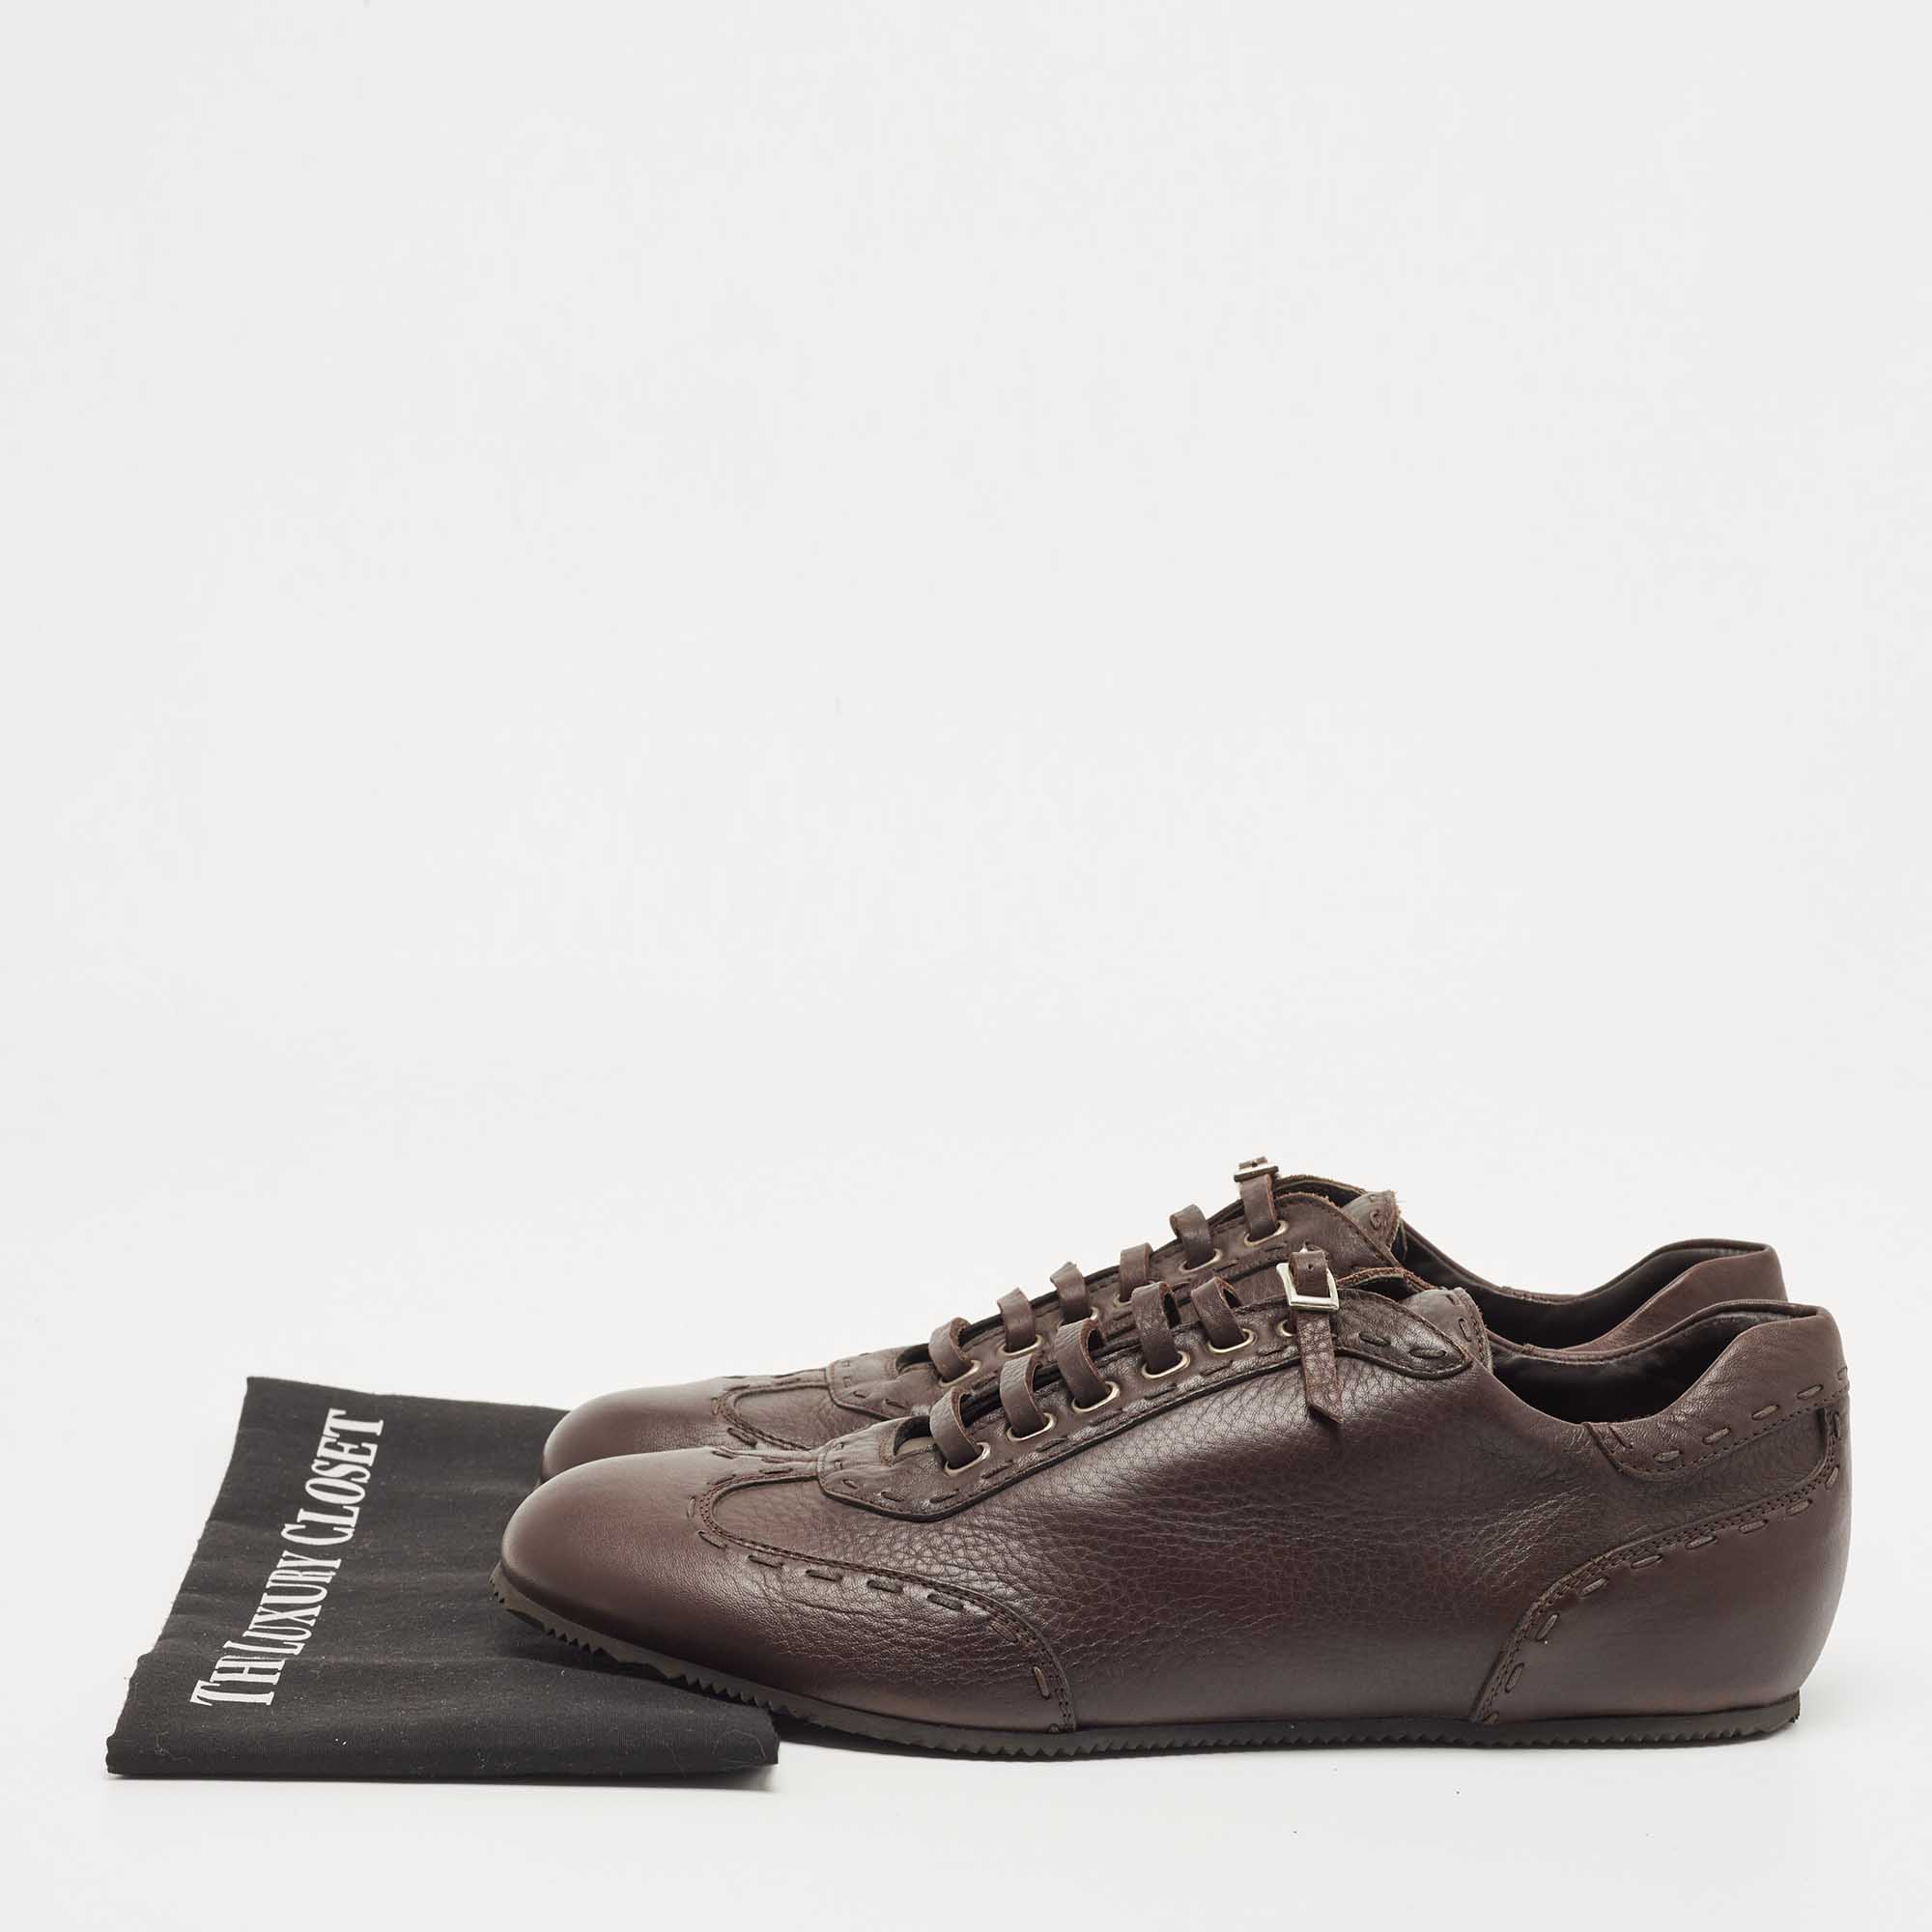 Fendi Brown Leather Lace Up Lace Up Sneakers Size 45